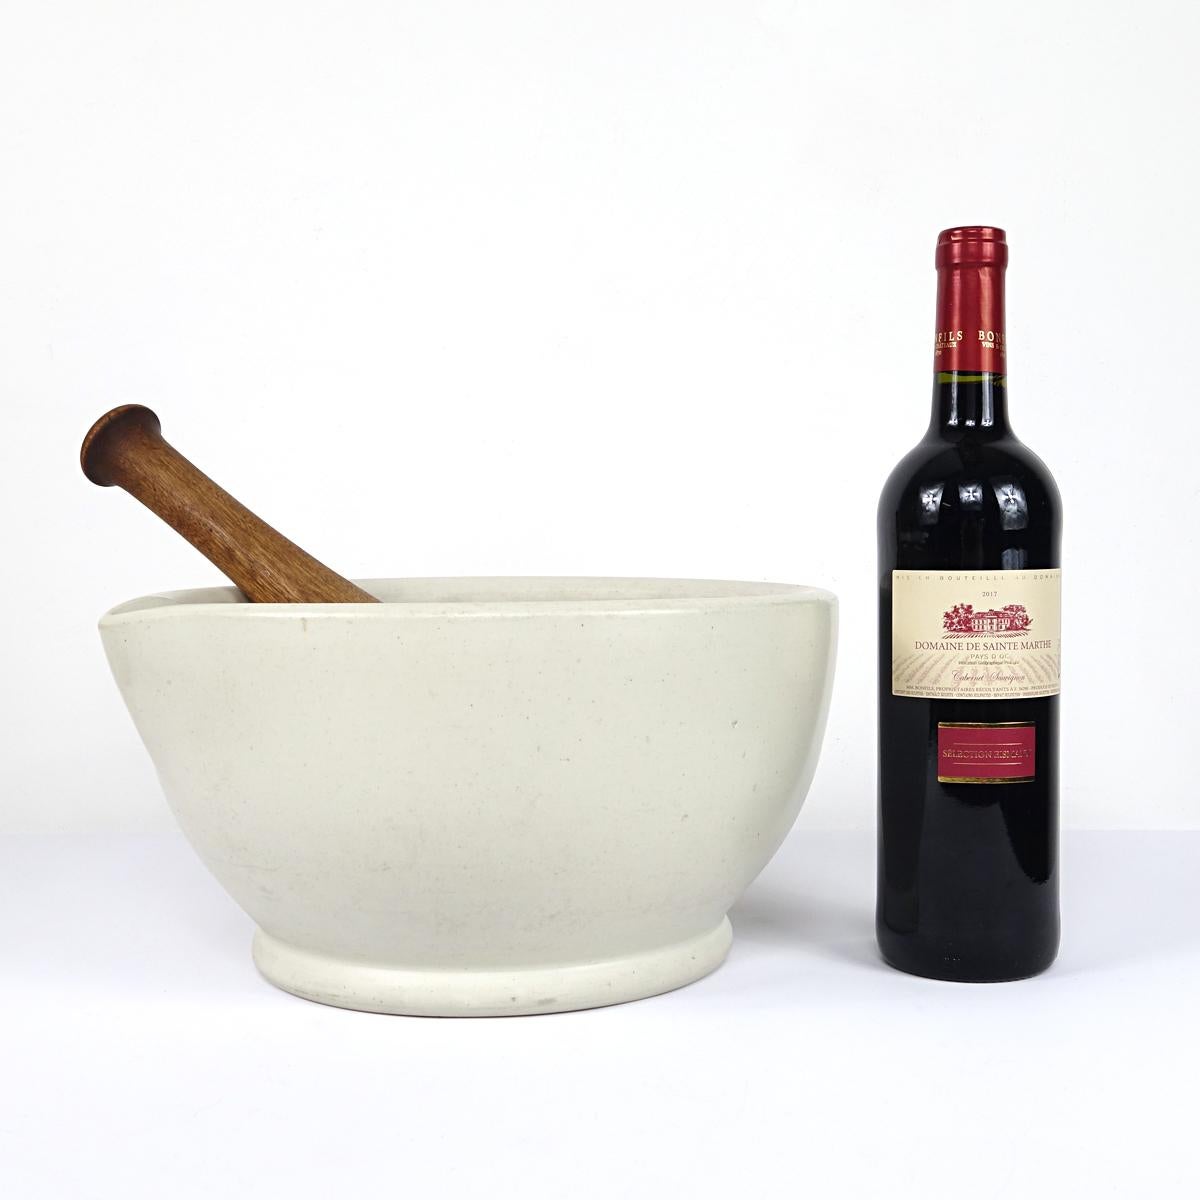 Extra large porcelain mortar with pestle made of porcelain and wood. 
A wonderful accent piece in your kitchen. The mortar is very heavy and solid. 

Dimensions mortar:
Height 15.5 cm (6.1 inch), length 30.5 cm (12 inch), width 29 cm (11.4